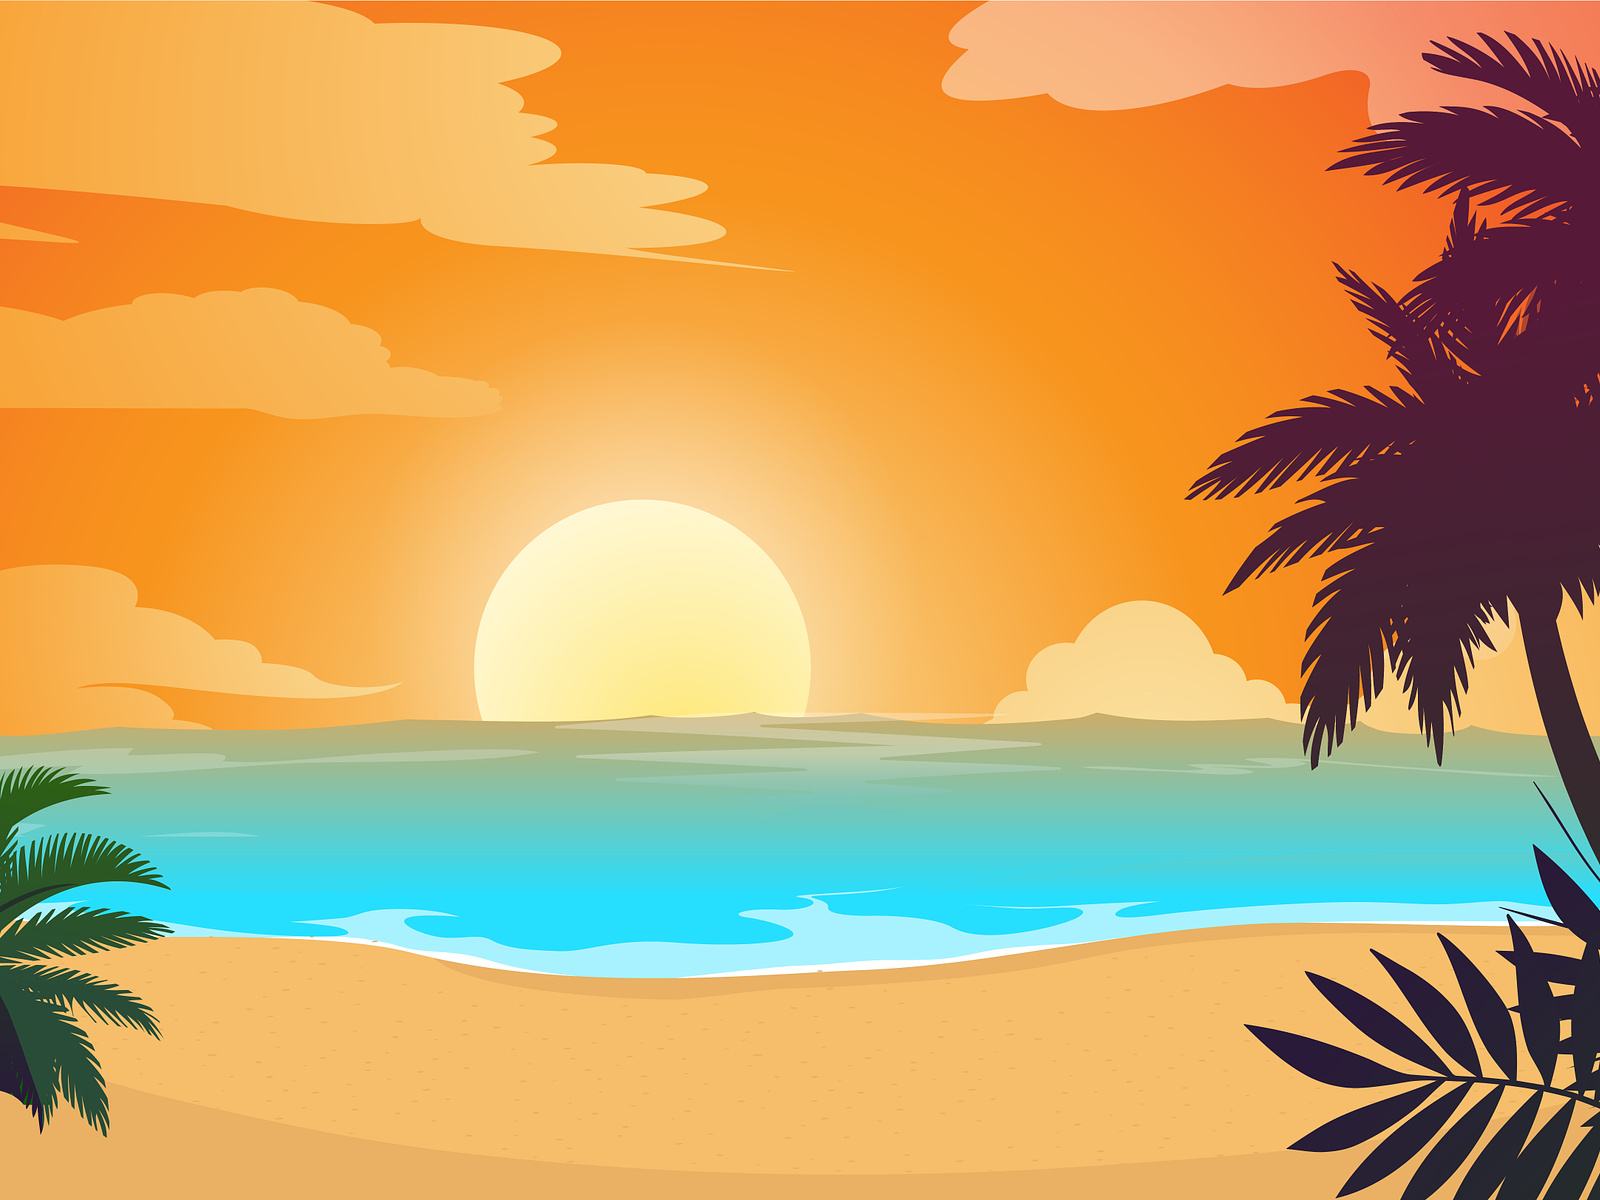 Sunset Cartoon Background by Cartoons.co on Dribbble